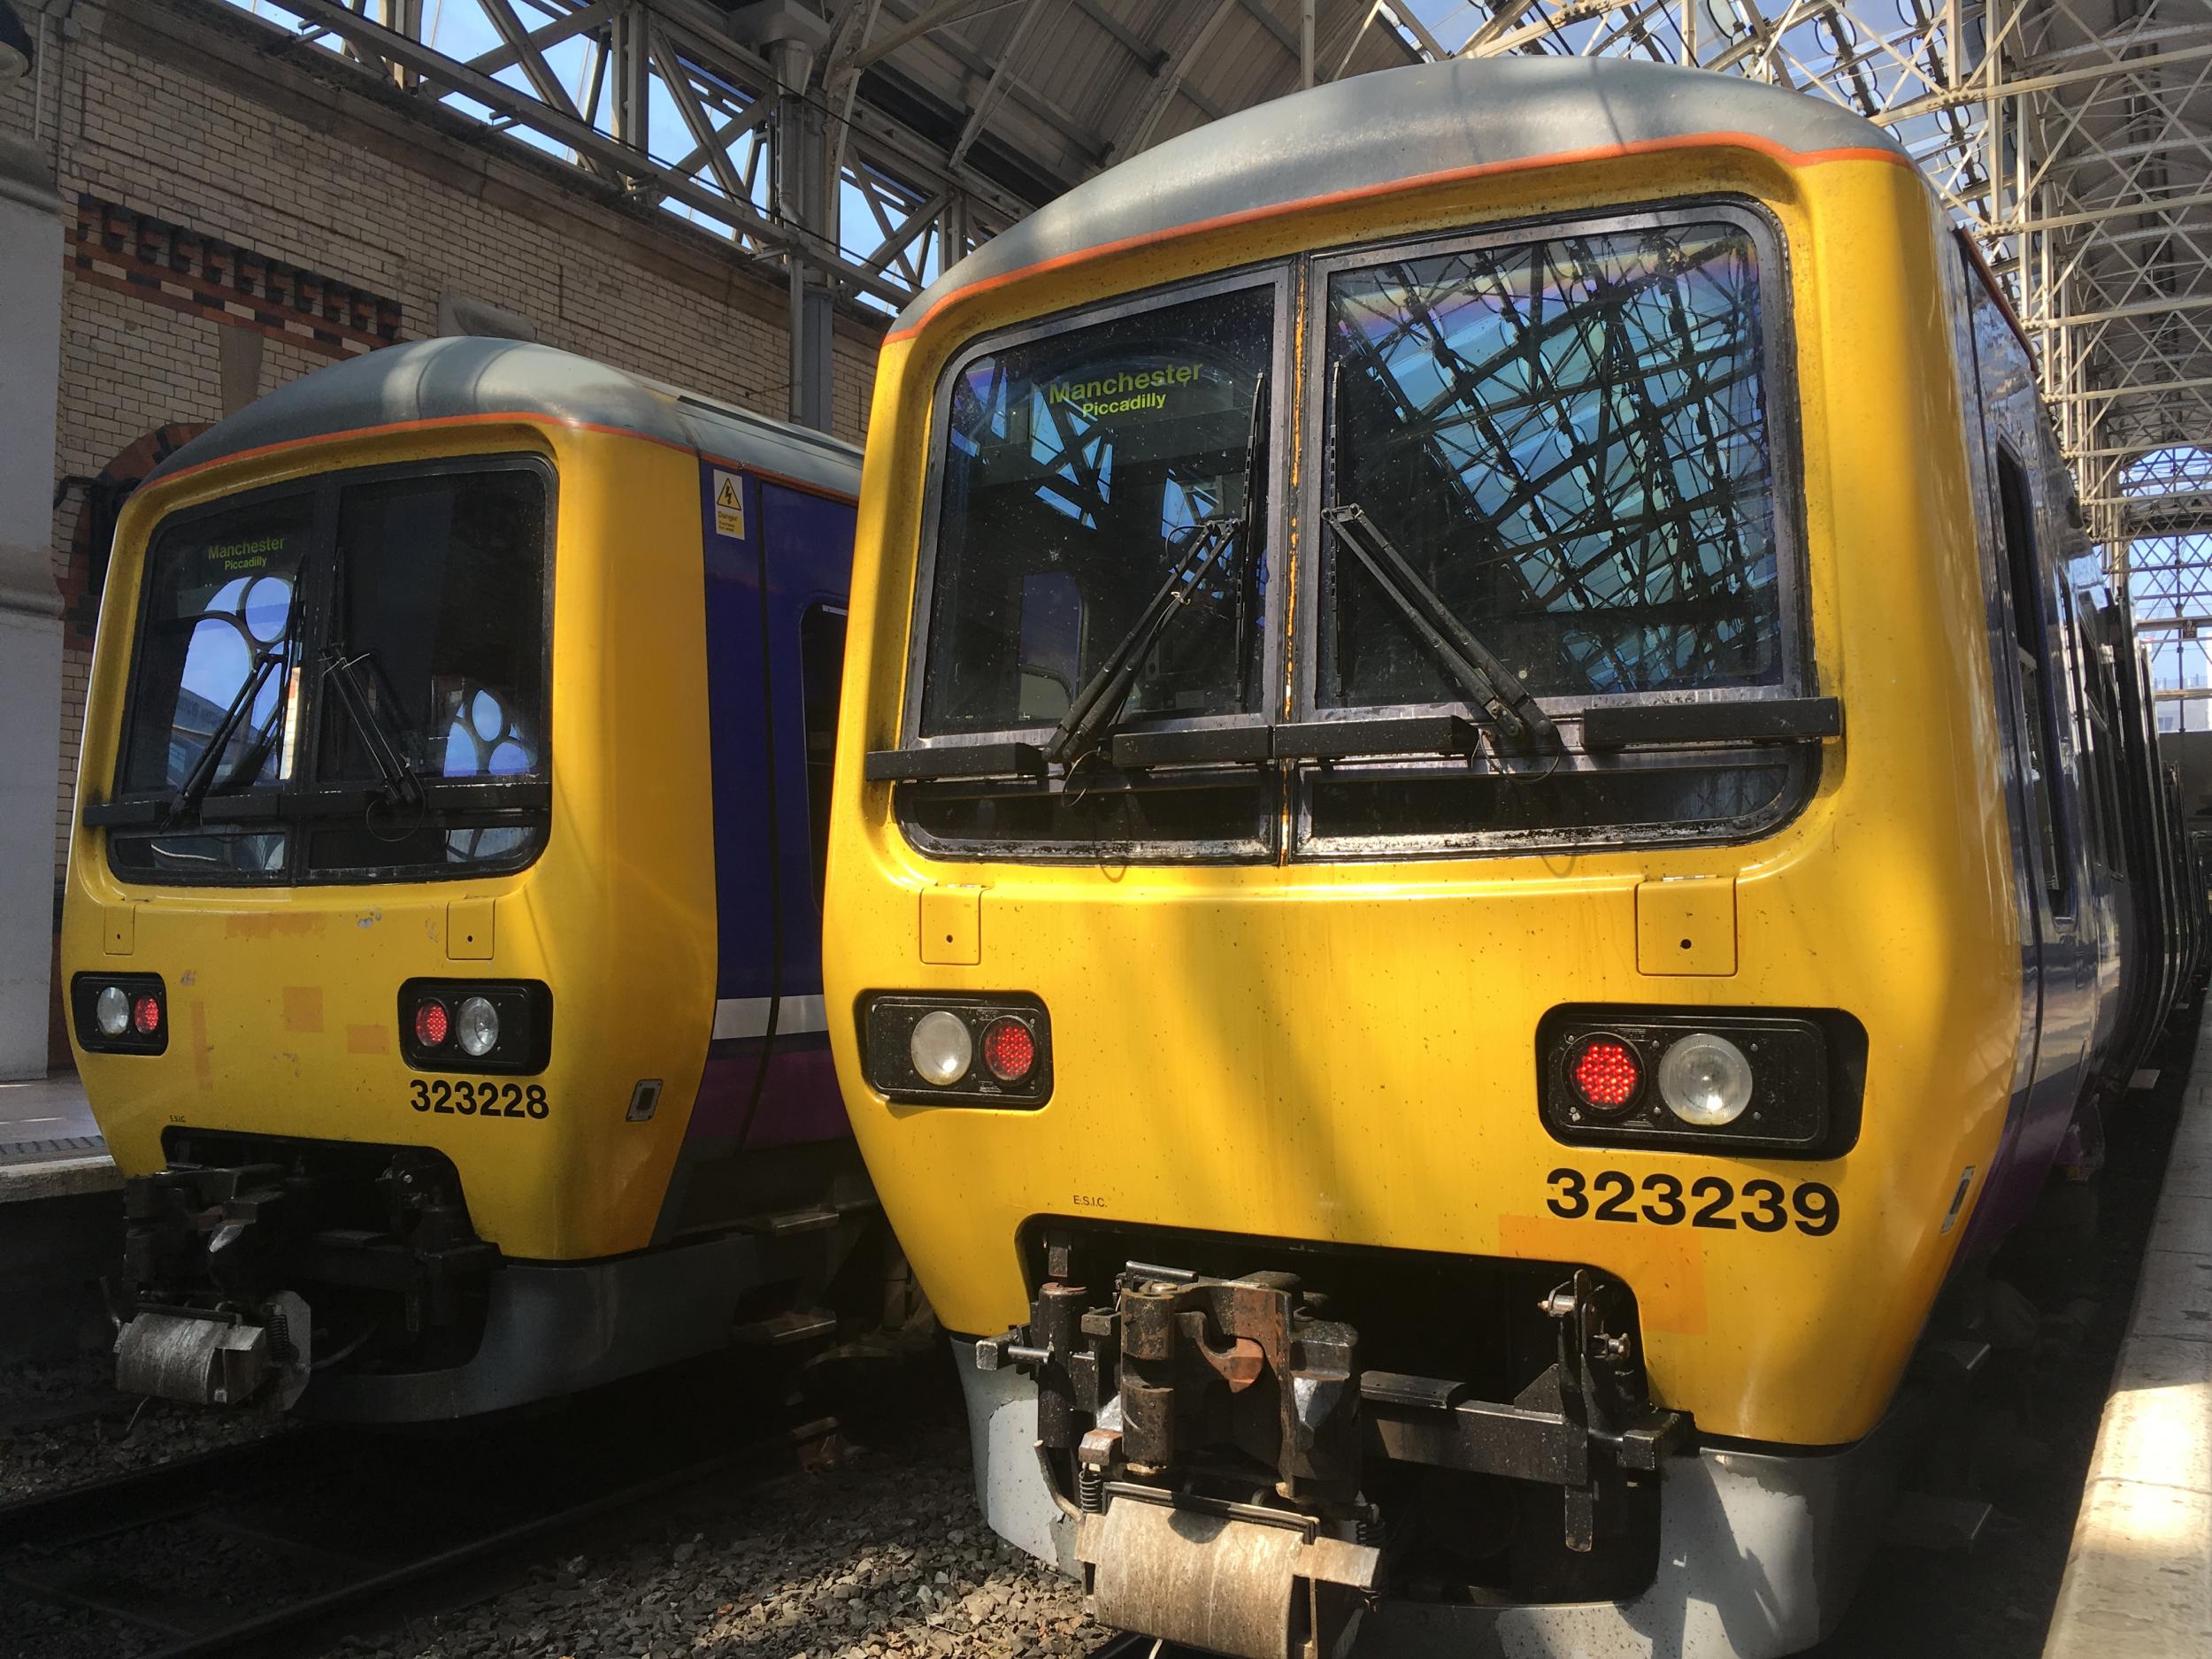 Staying put: Northern trains at Manchester Piccadilly station